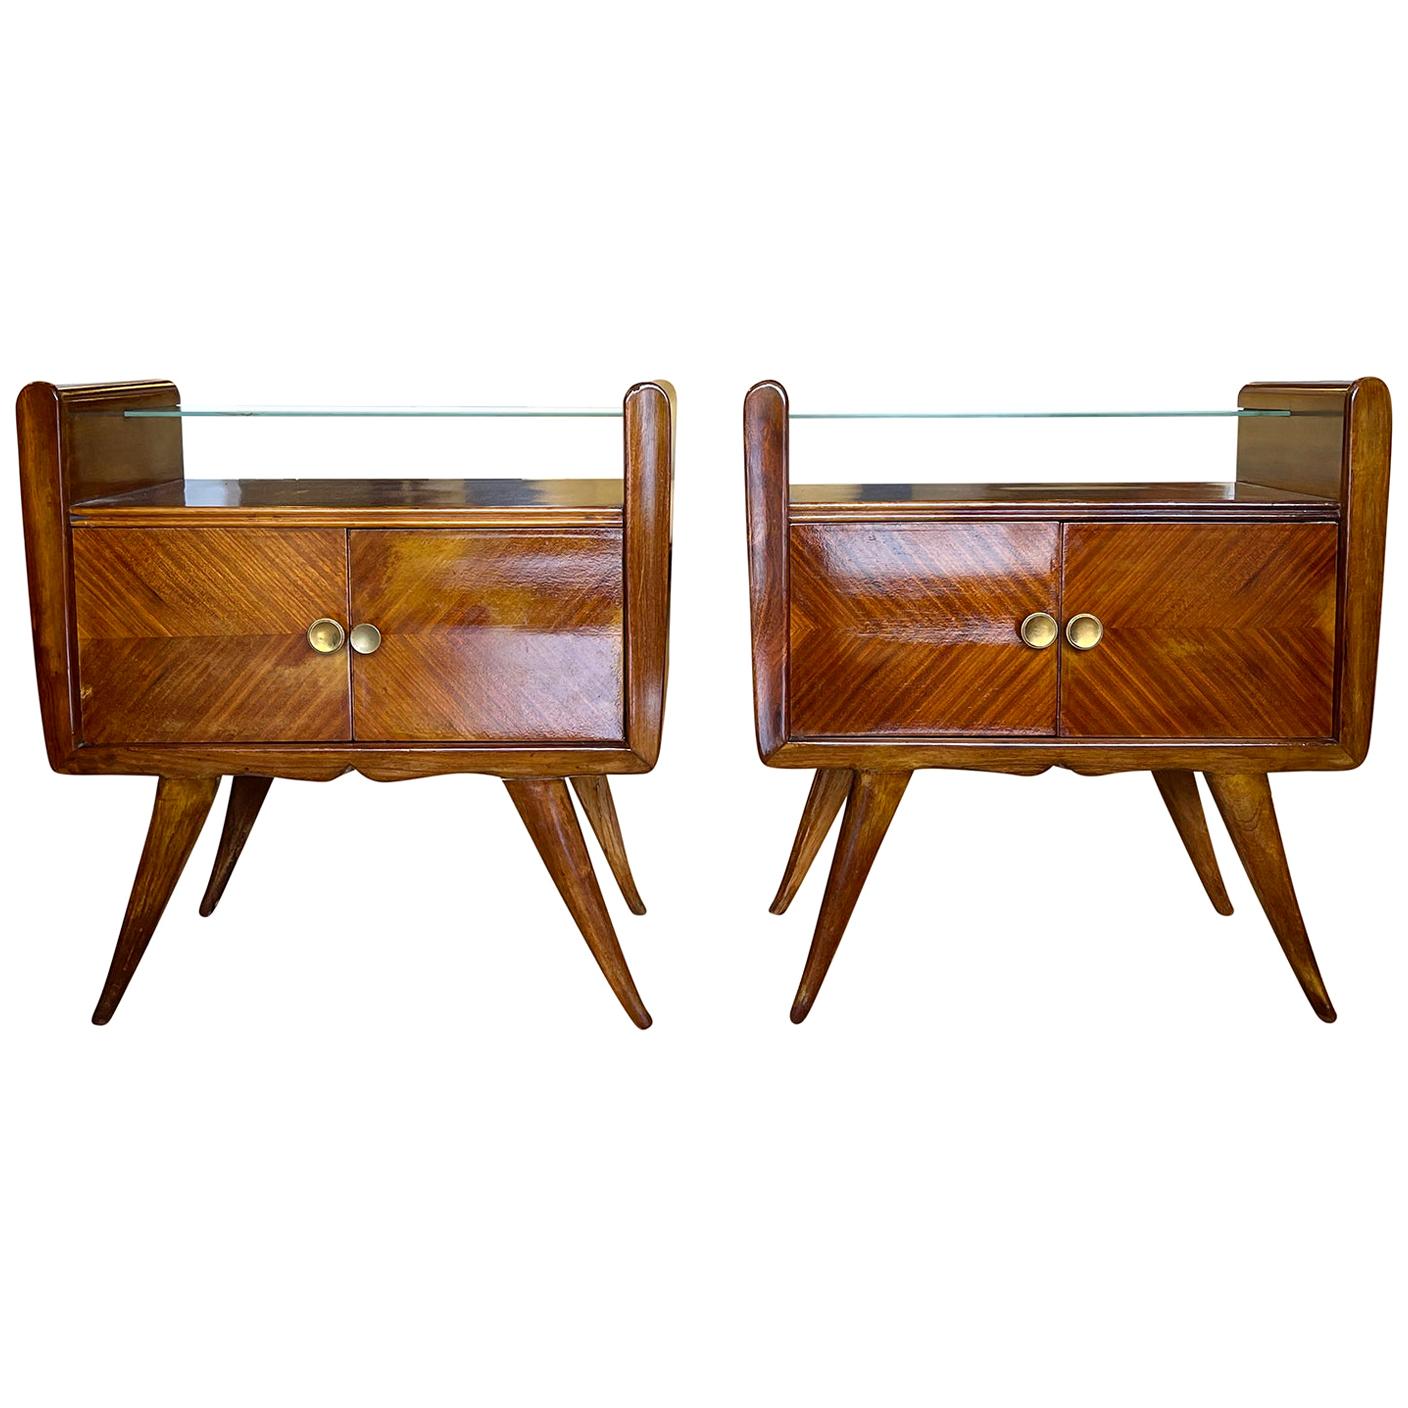 20th Century Italian Pair of Walnut Nightstands, Bedside Tables by Paolo Buffa